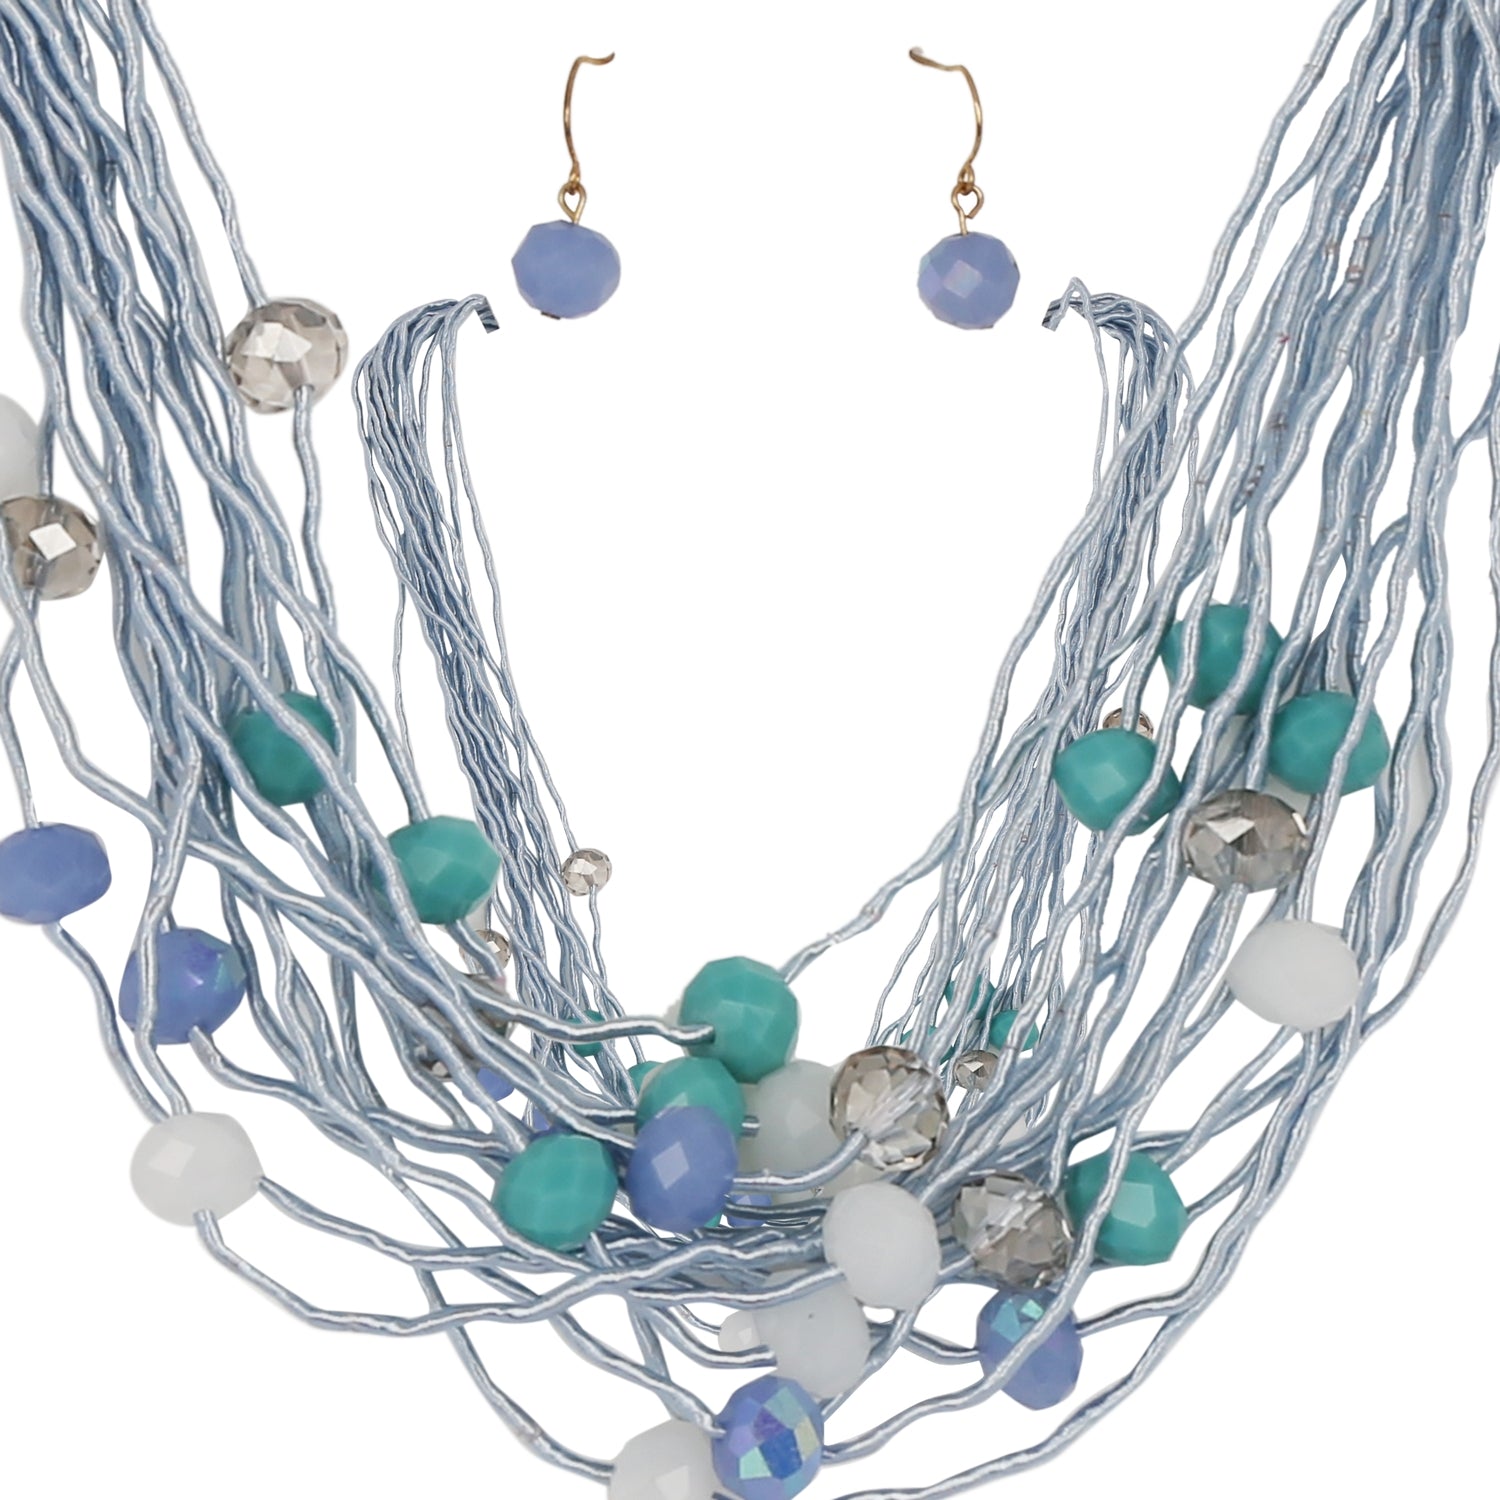 BLUE BEADS NECKLACE WITH PAIR OF EARRINGS - Coral Tree 